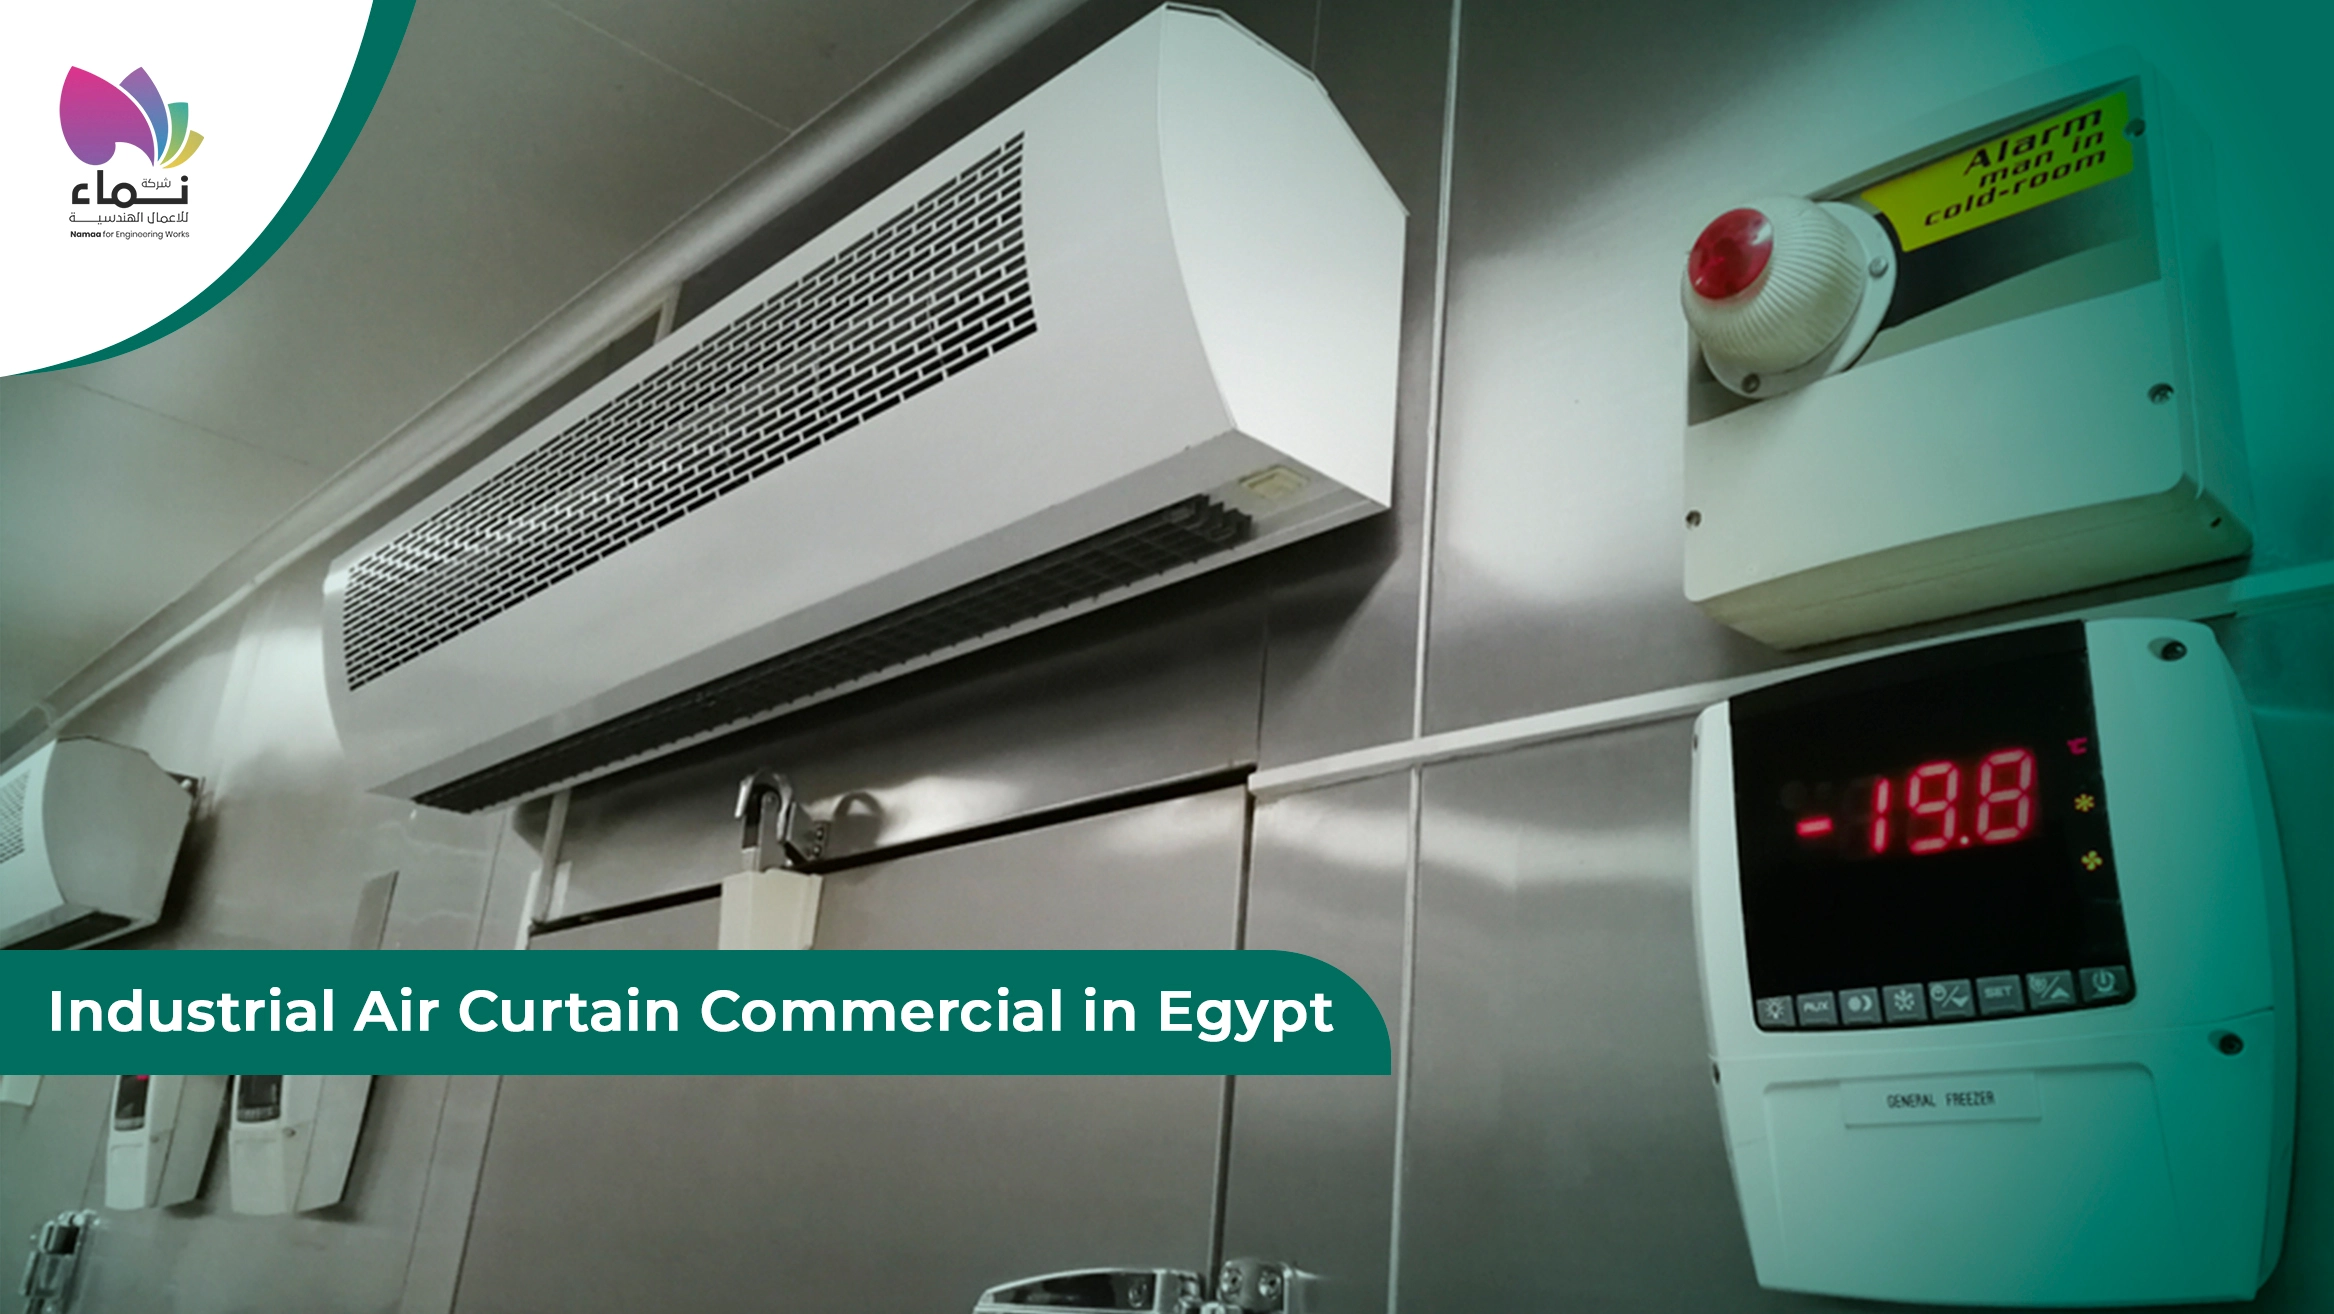 Industrial Air Curtain Commercial in Egypt